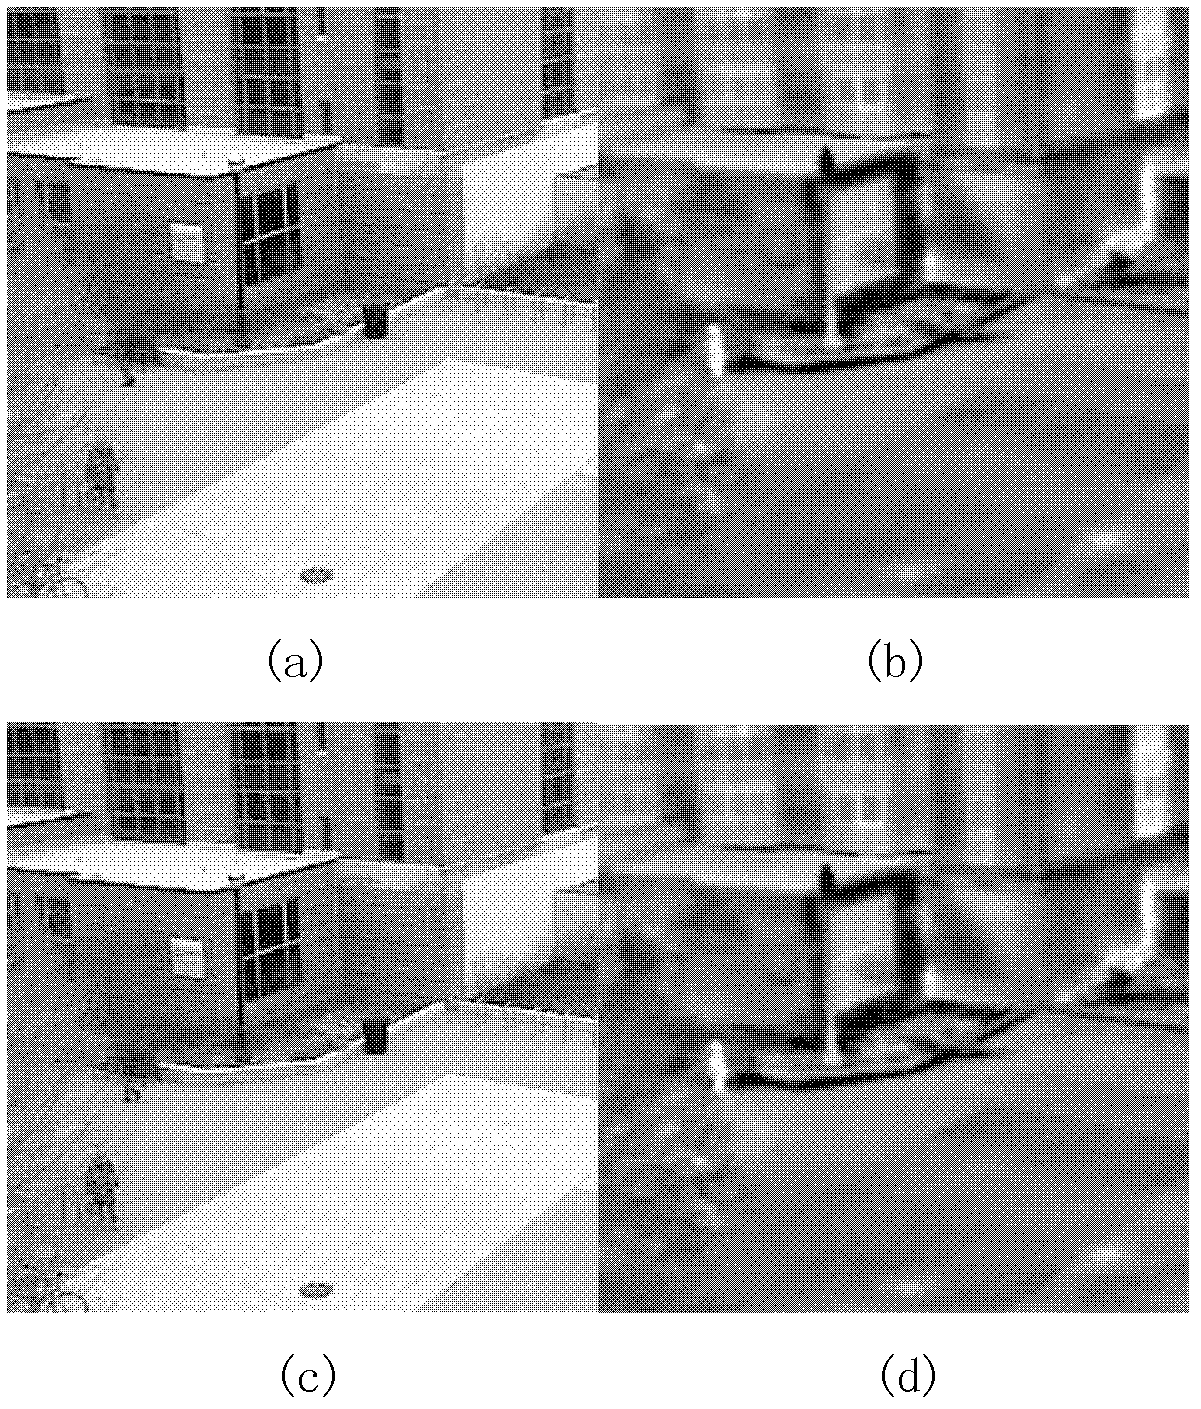 Video image fusion performance evaluation method based on structure similarity and human vision